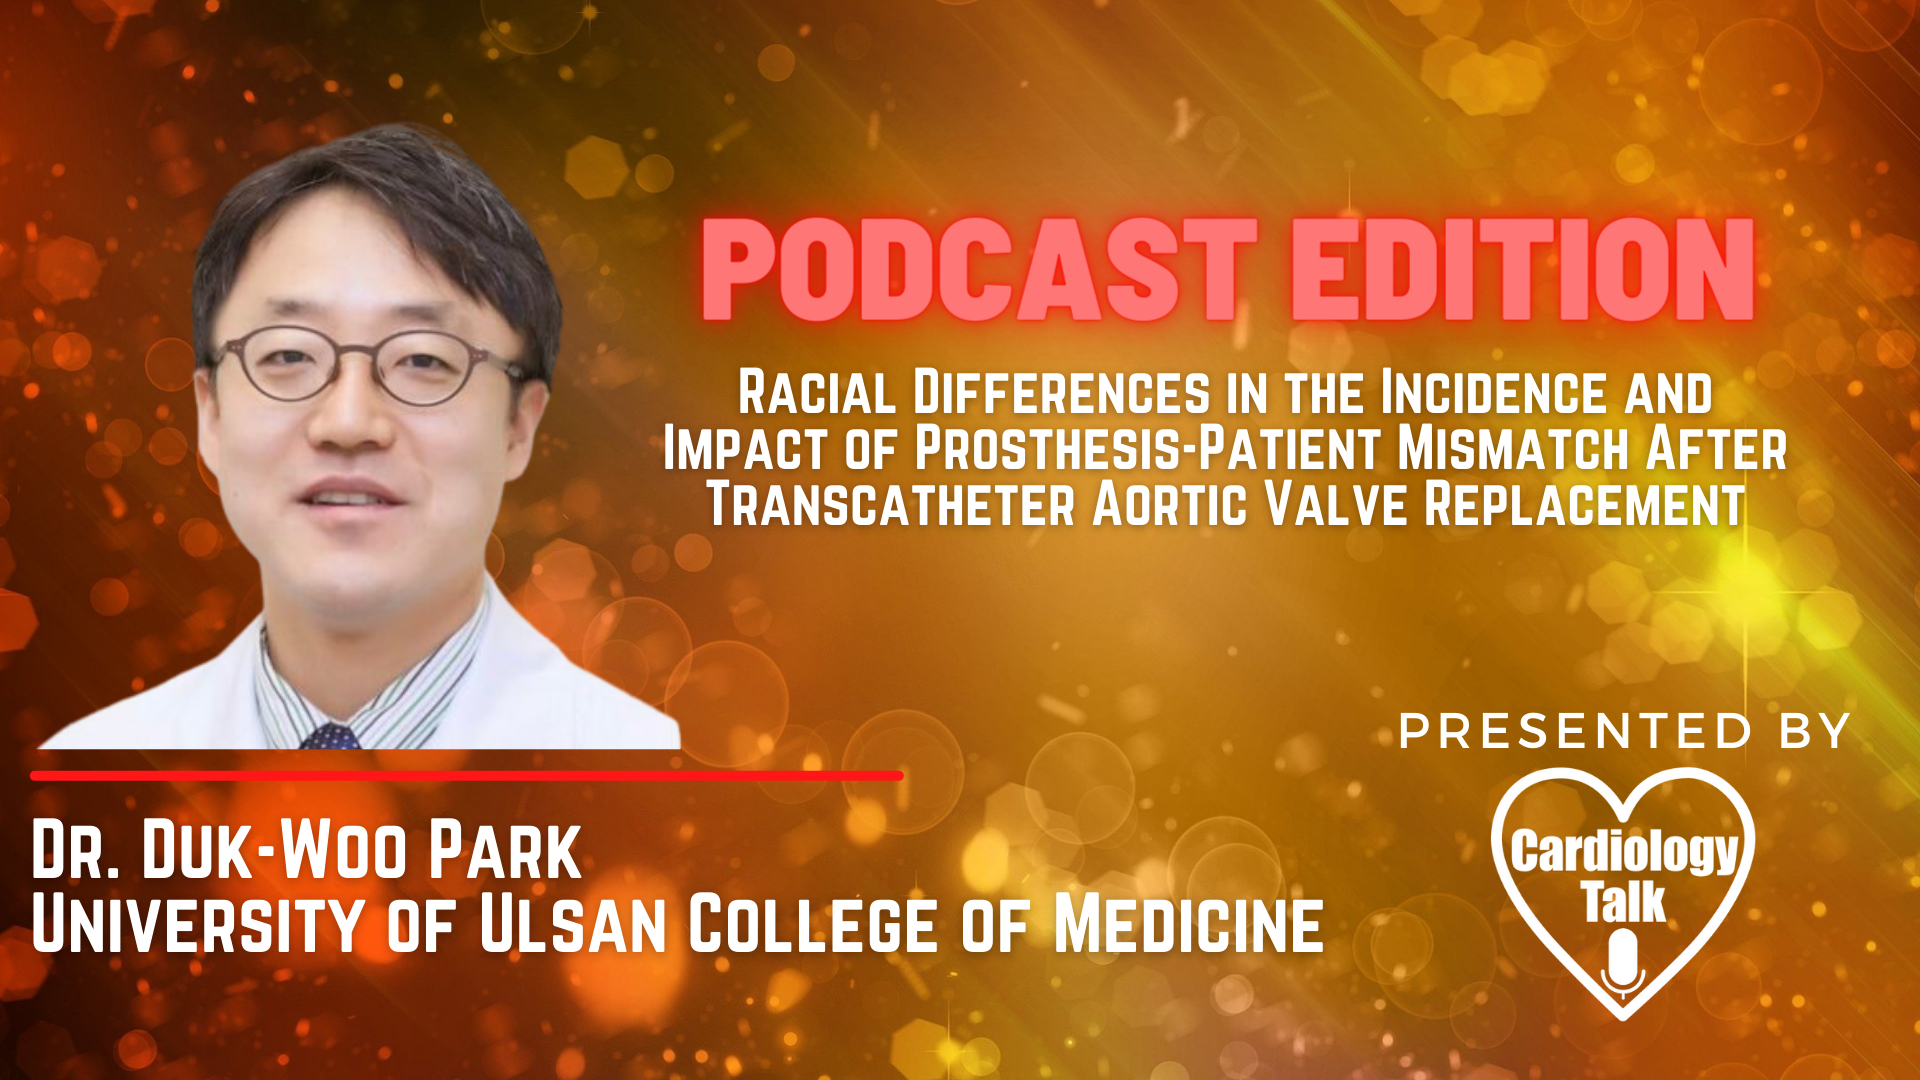 Podcast- Dr. Duk-Woo Park, MD - Racial Differences in the Incidence and Impact of Prosthesis-Patient Mismatch After Transcatheter Aortic Valve Replacement